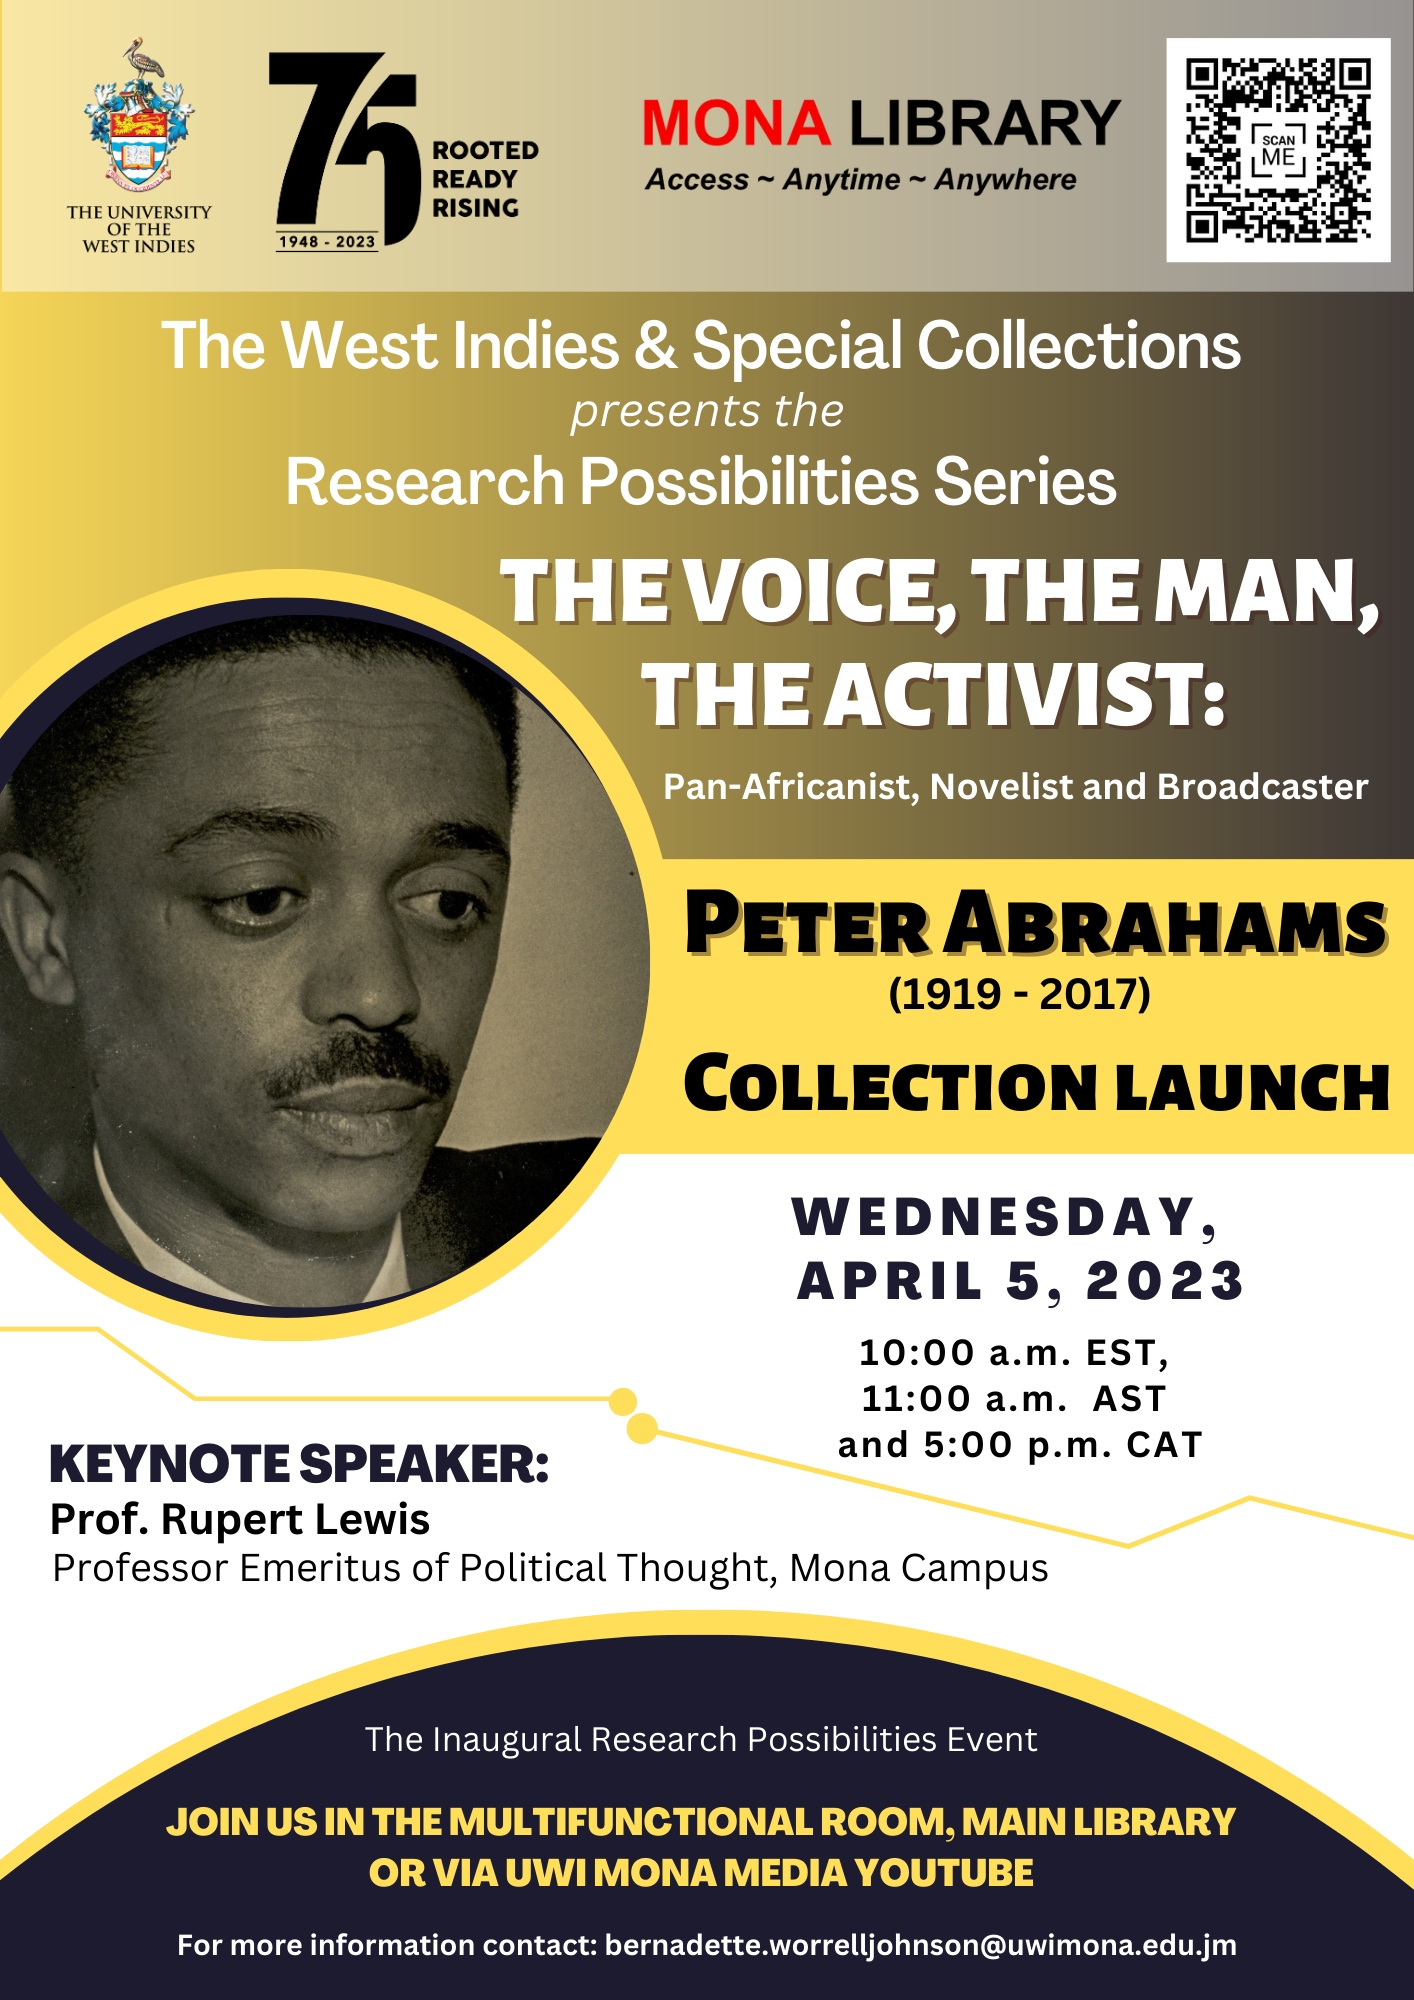 Peter Abrahams Collection Launch: The Voice, The Man and the Activist